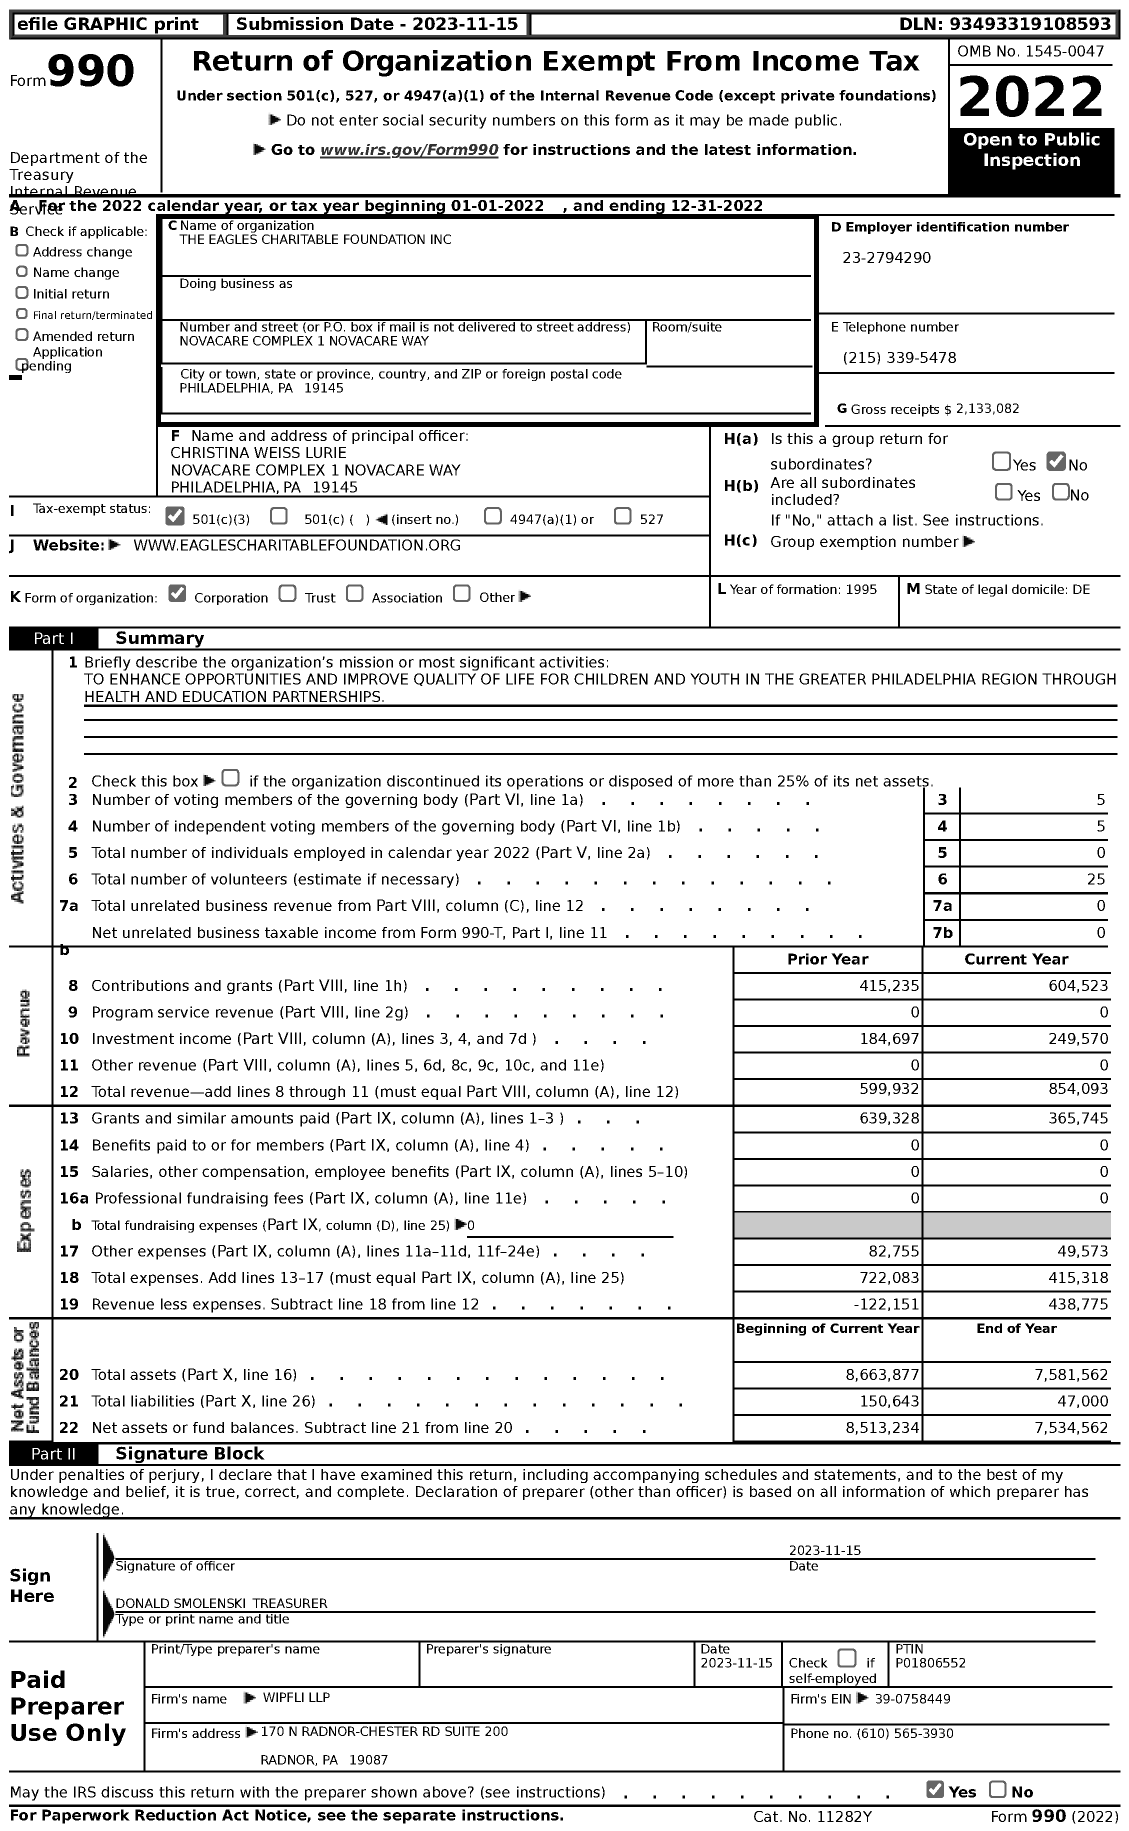 Image of first page of 2022 Form 990 for Eagles Charitable Foundation (ECF)